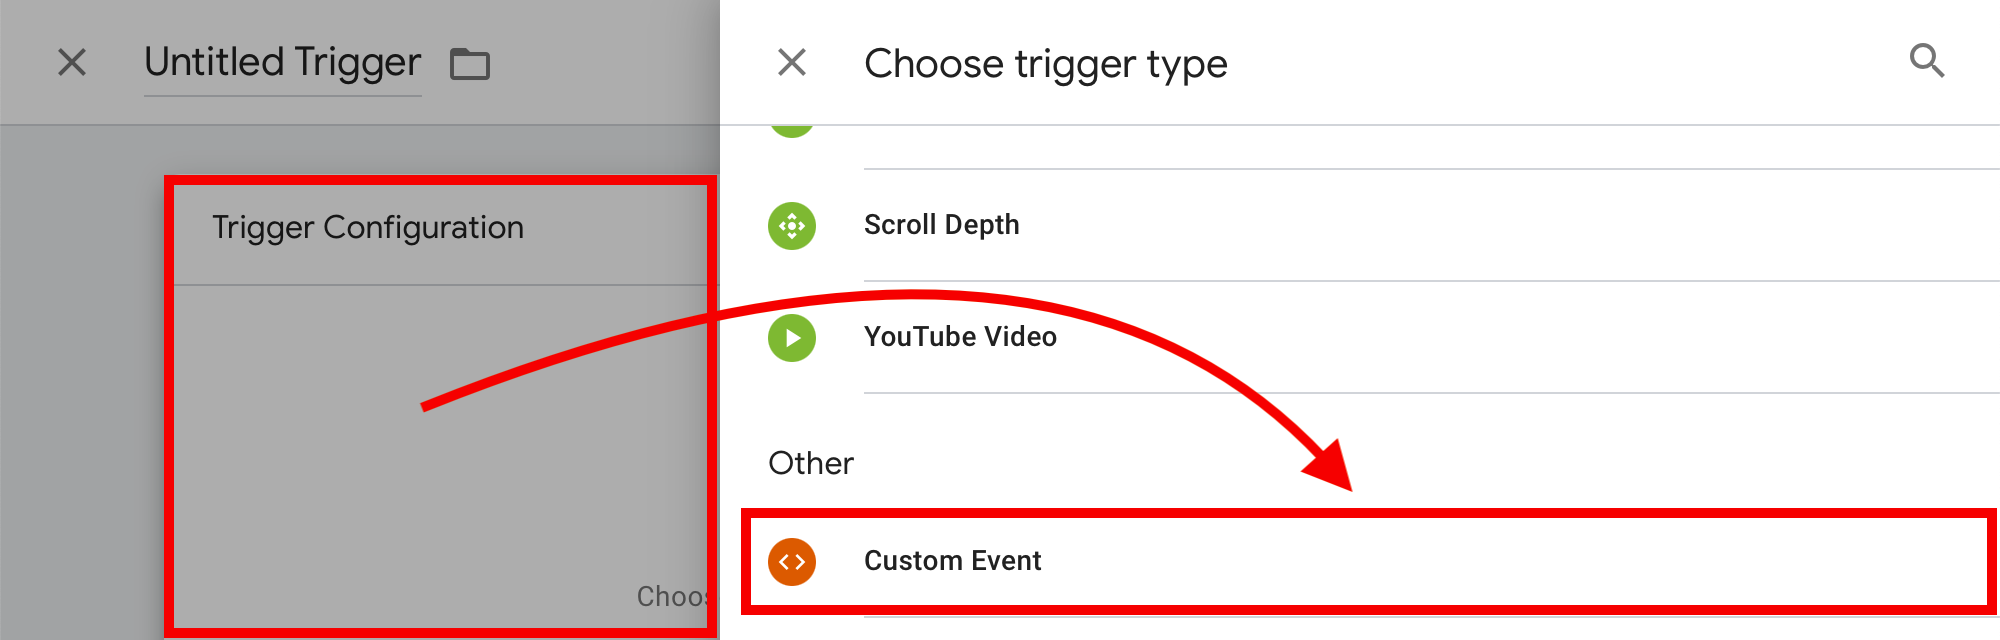 Tracking events on Google Analytics 4 via Google Tag Manager